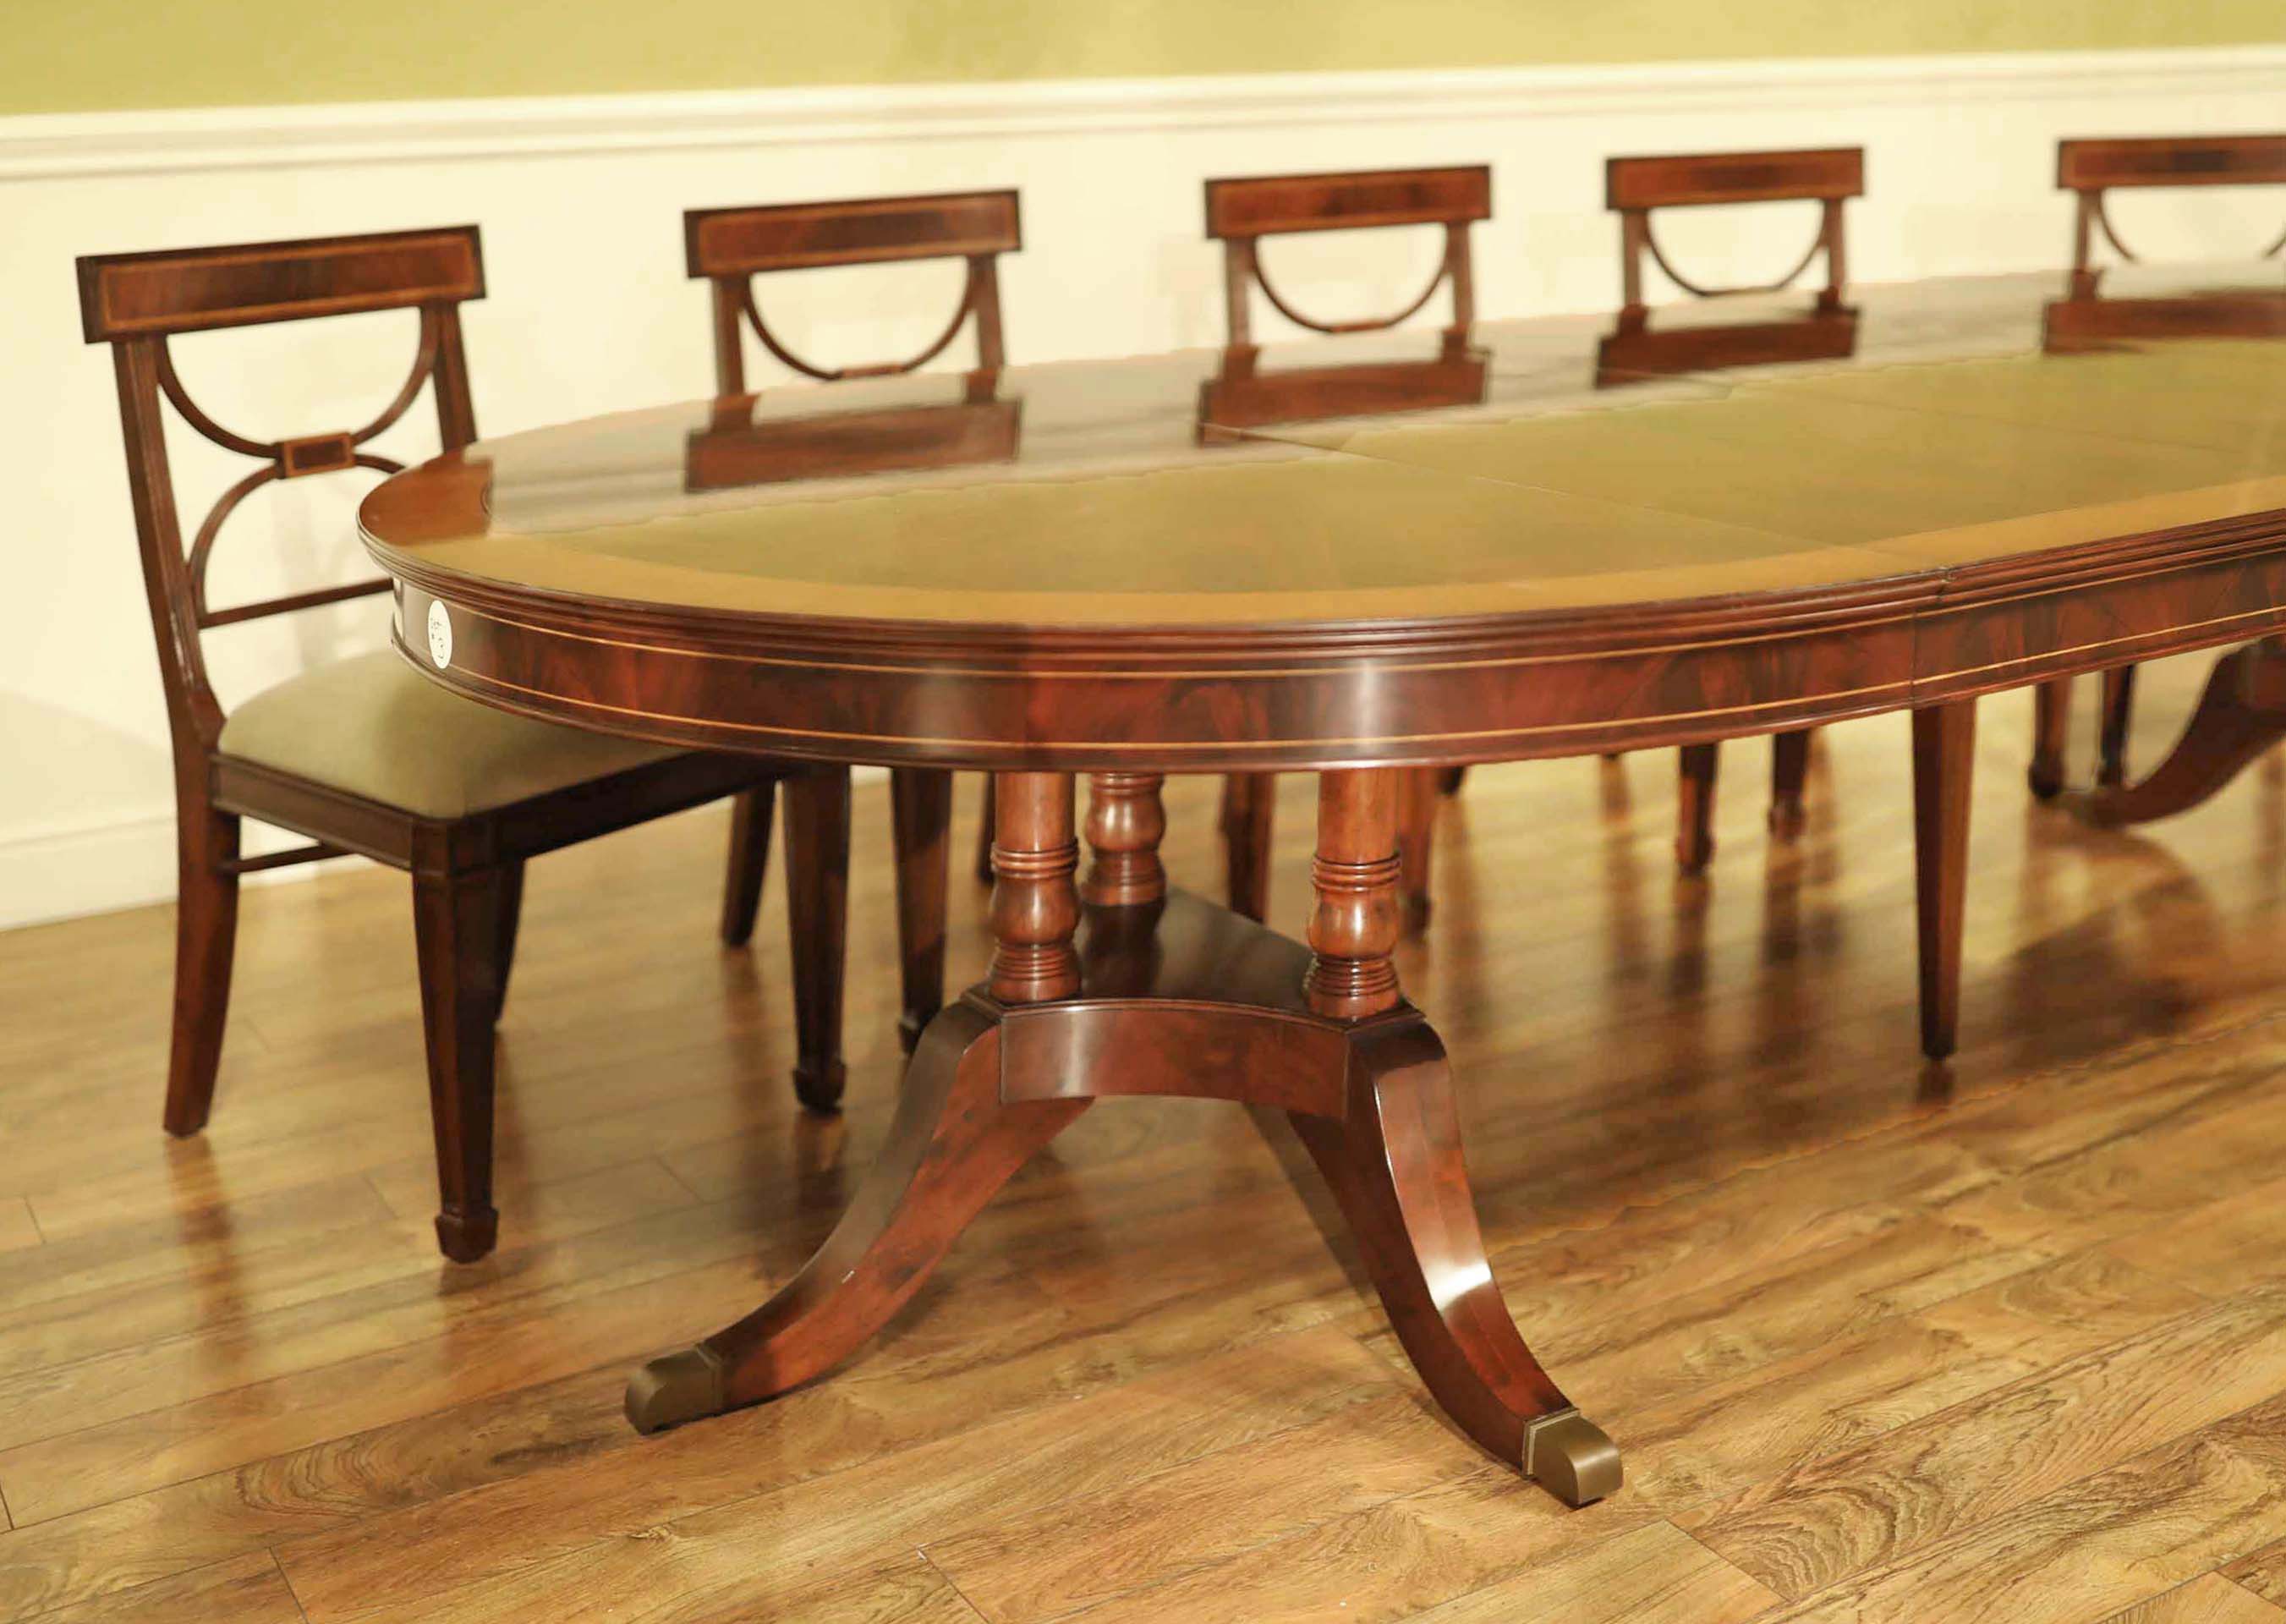 High Quality Mahogany Furniture For A Traditional Dining Room